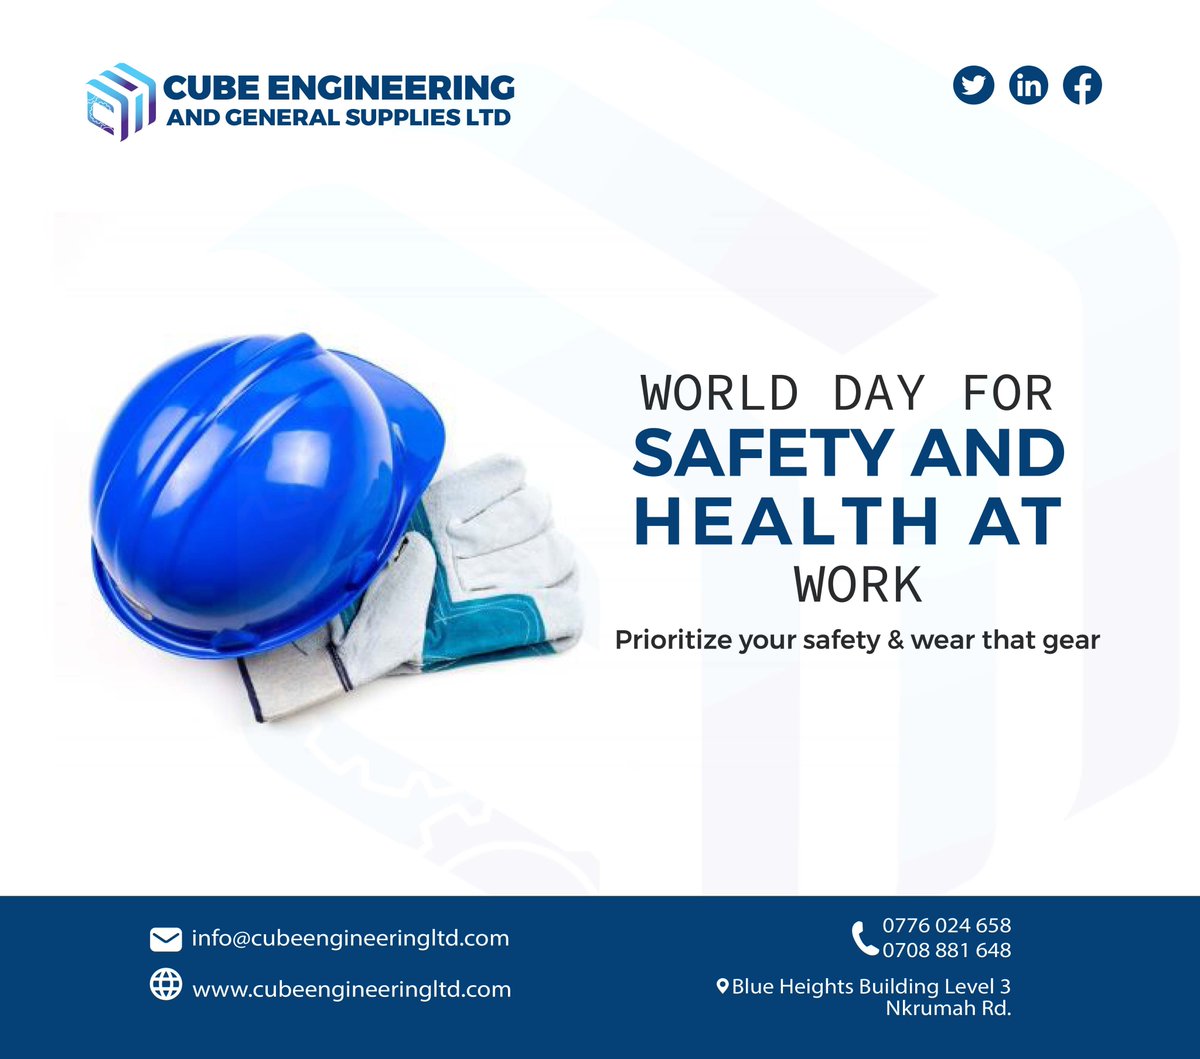 As we celebrate world safety, Let's make safety a habit and always remember to wear your safety gear, it's not just a piece of equipment, it's your lifeline.
#WorldSafetyDay